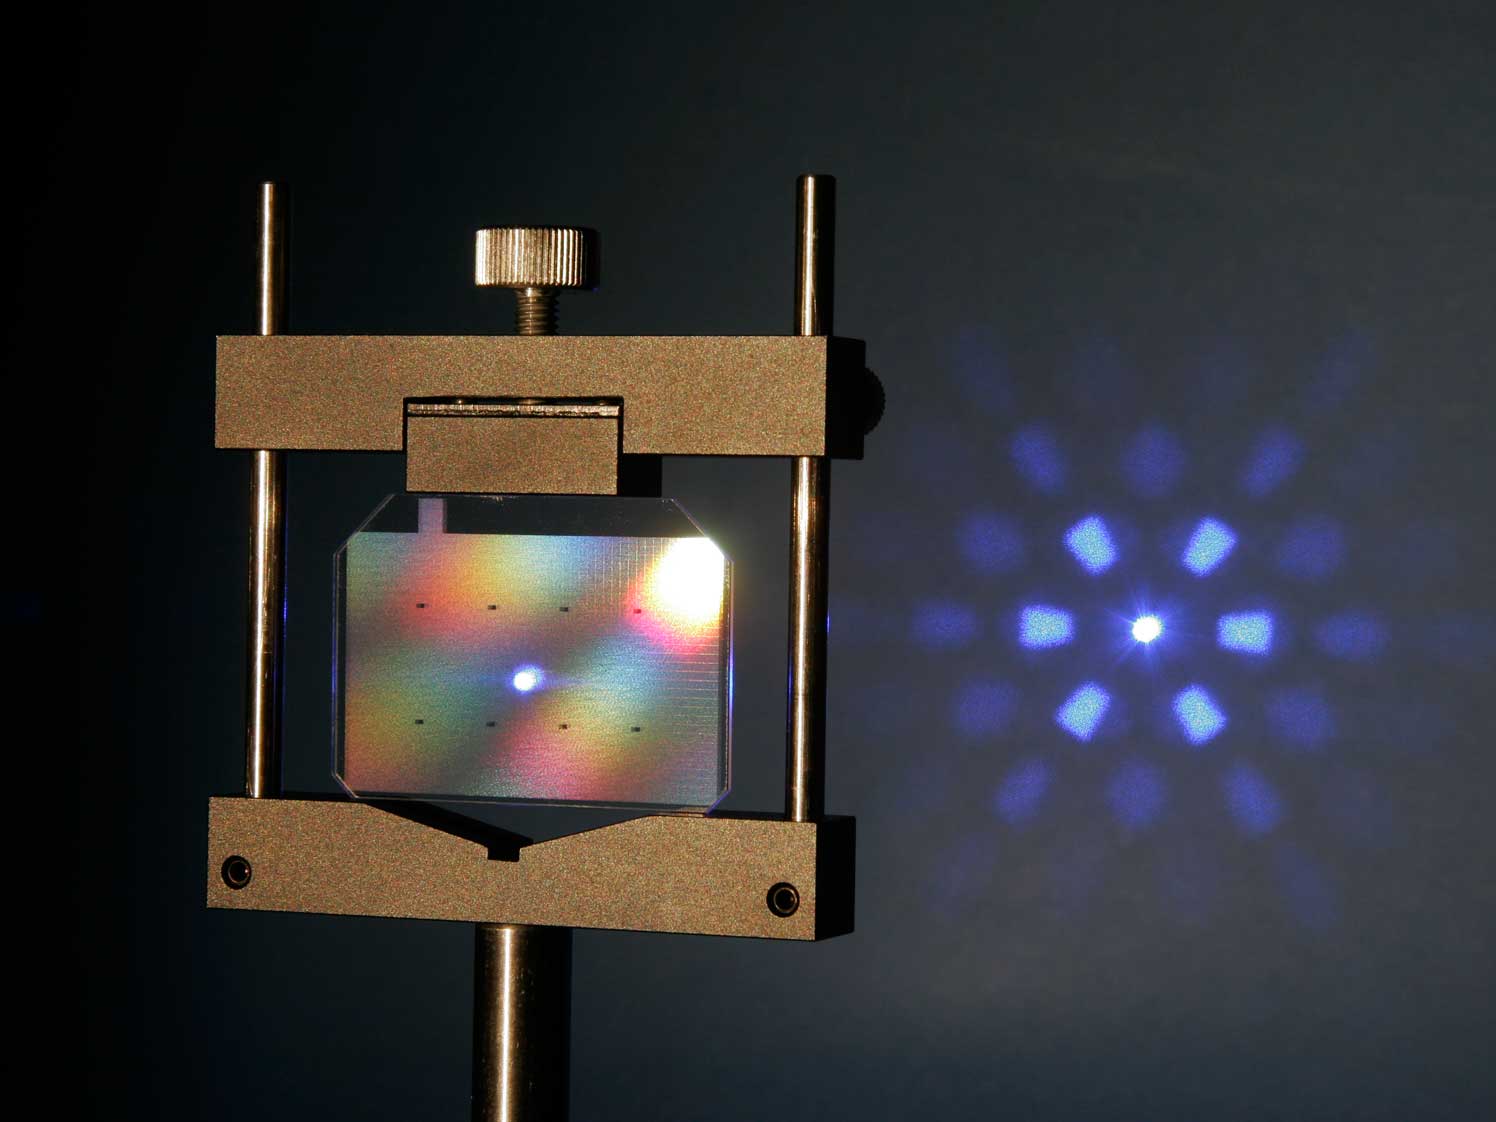 What are the Advantages and Fields of Applications of Diffractive Optical Elements?